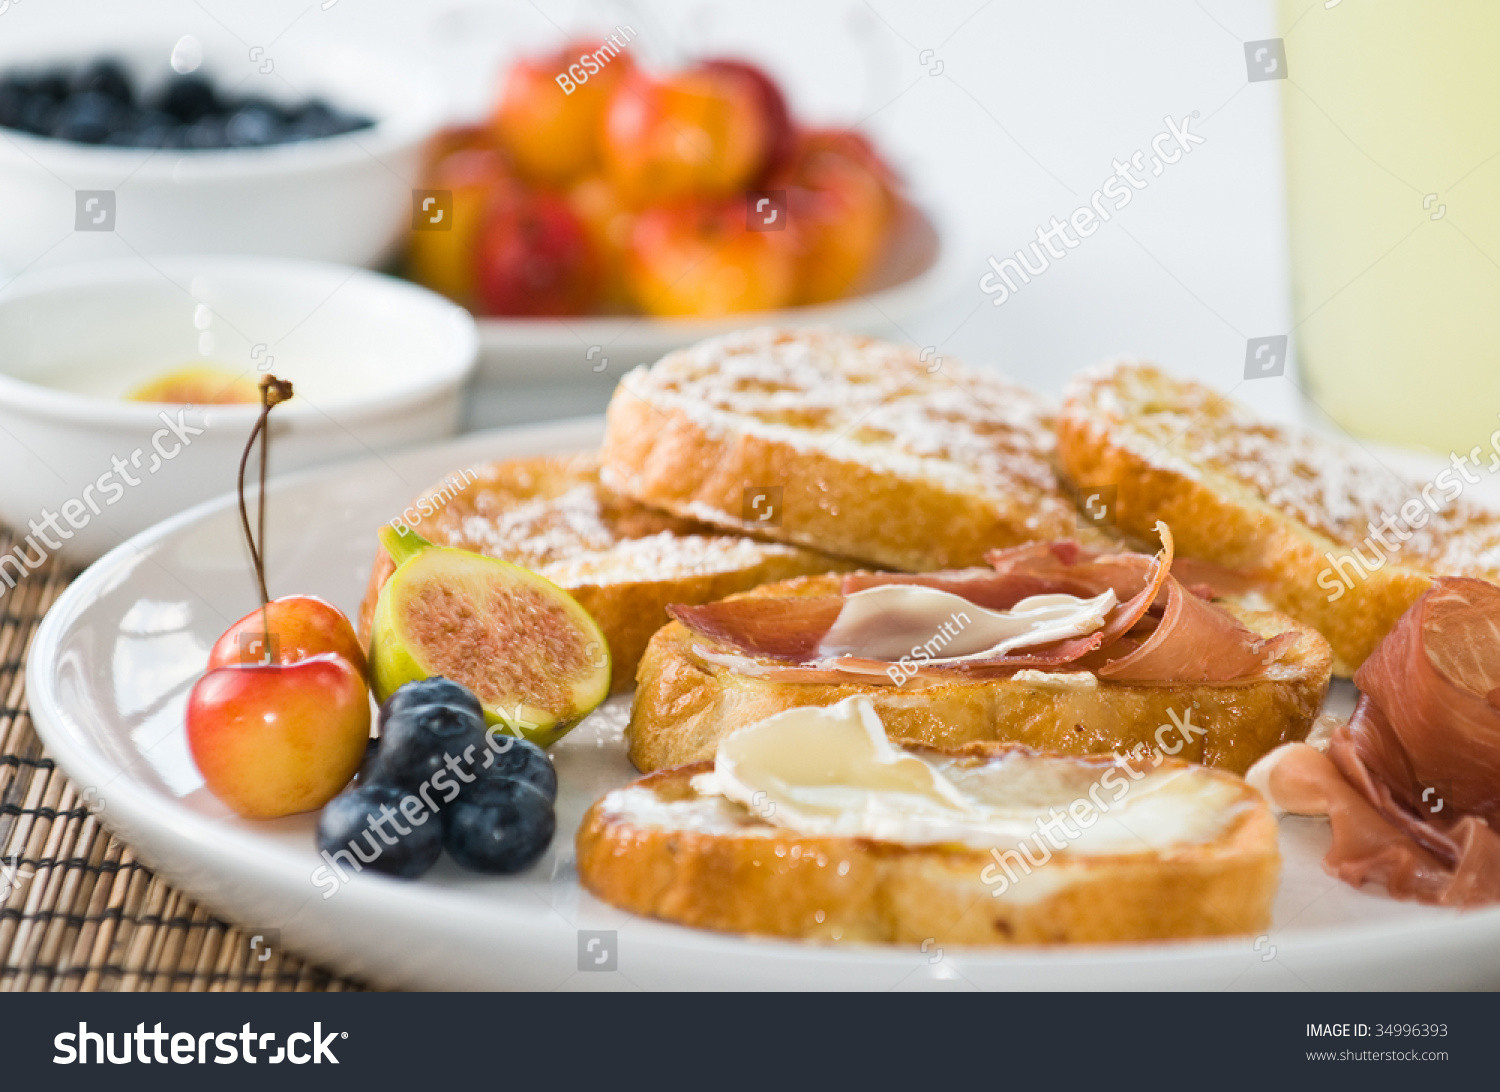 Gourmet French Toast
 Gourmet Breakfast French Toast With Prosciutto And Brie